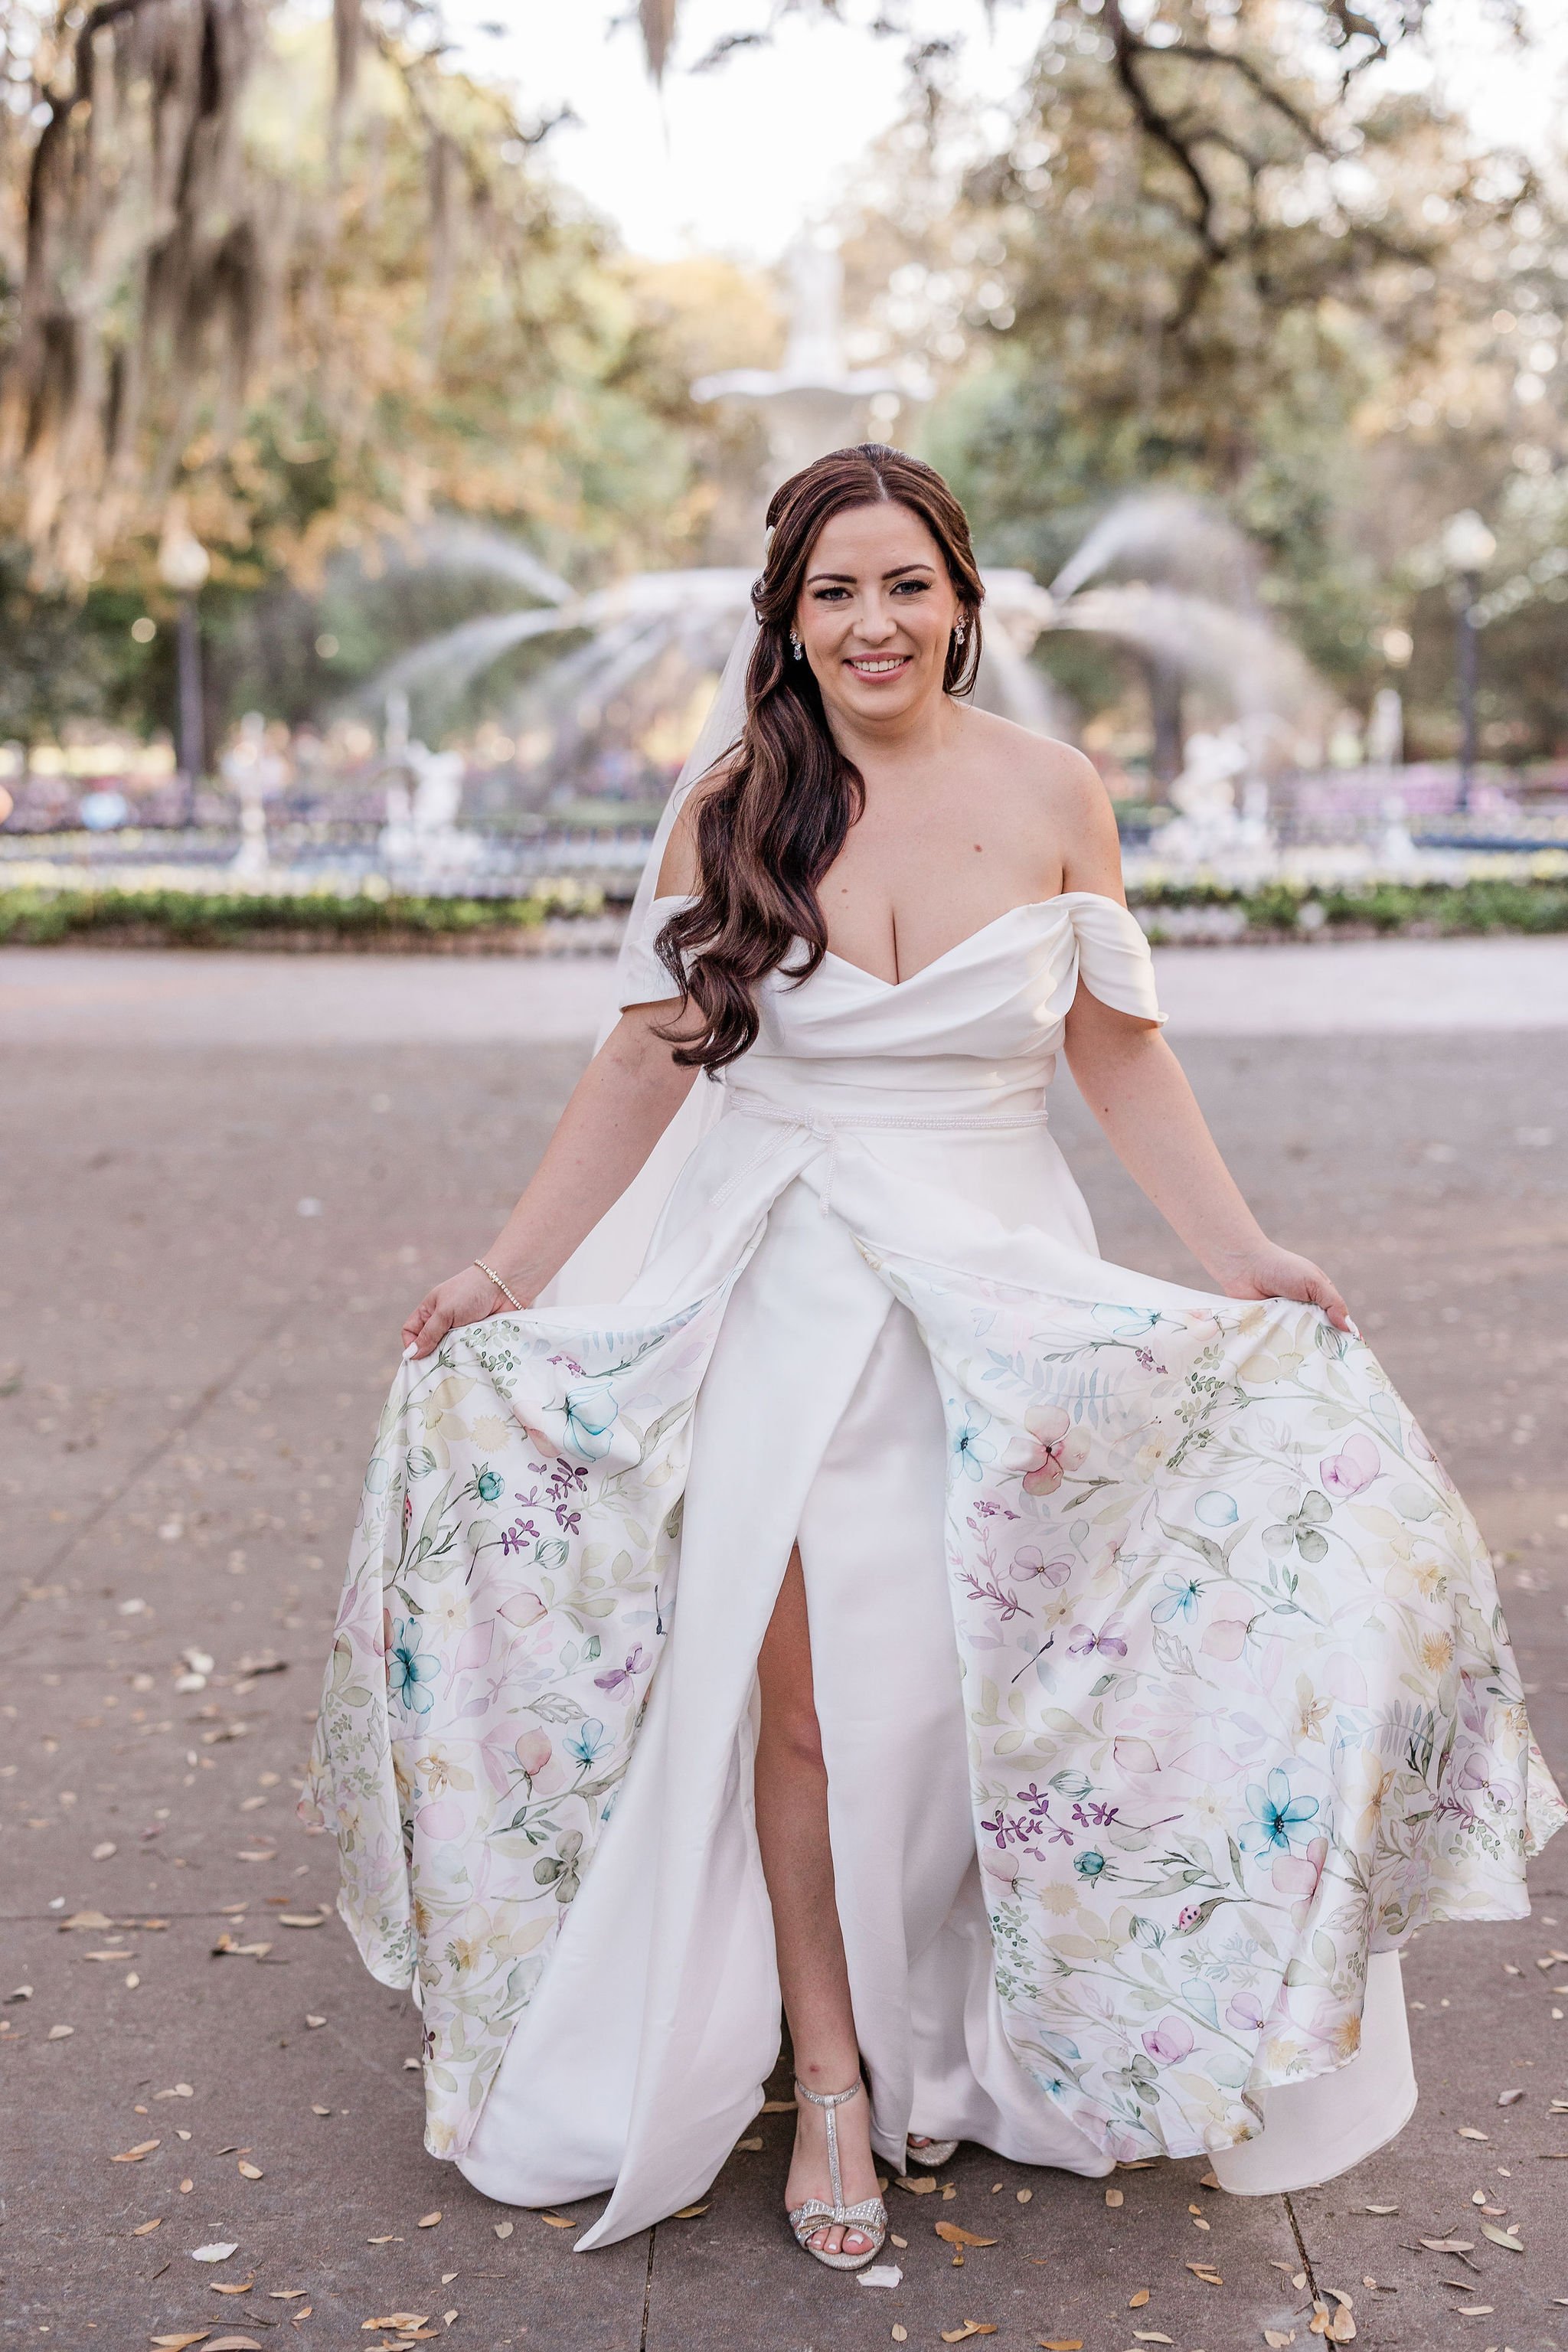 Victoria-and-stuarts-pastel-spring-wedding-at-the-forsyth-park-fountain-and-the-mansion-on-forsyth-in-savannah-georgia-planned-by-savannah-wedding-planner-and-savannah-wedding-florist-ivory-and-beau-6.JPG